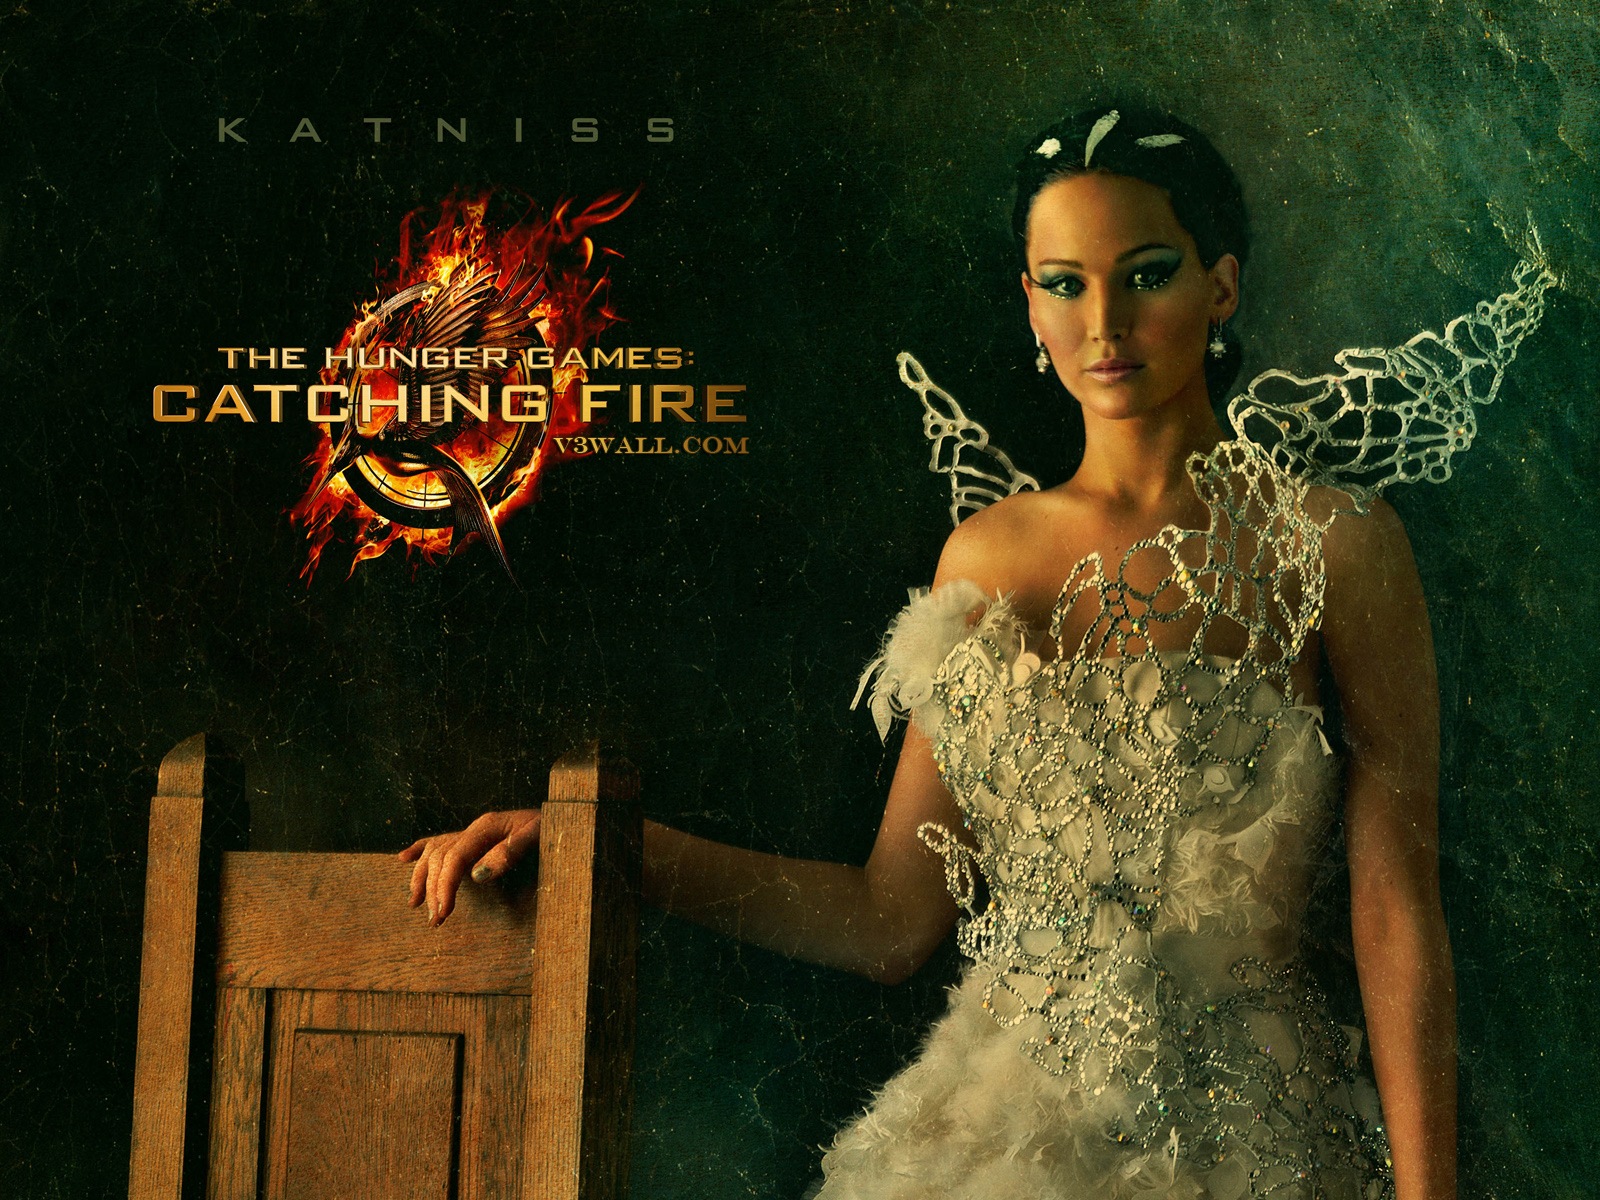 The Hunger Games: Catching Fire wallpapers HD #13 - 1600x1200